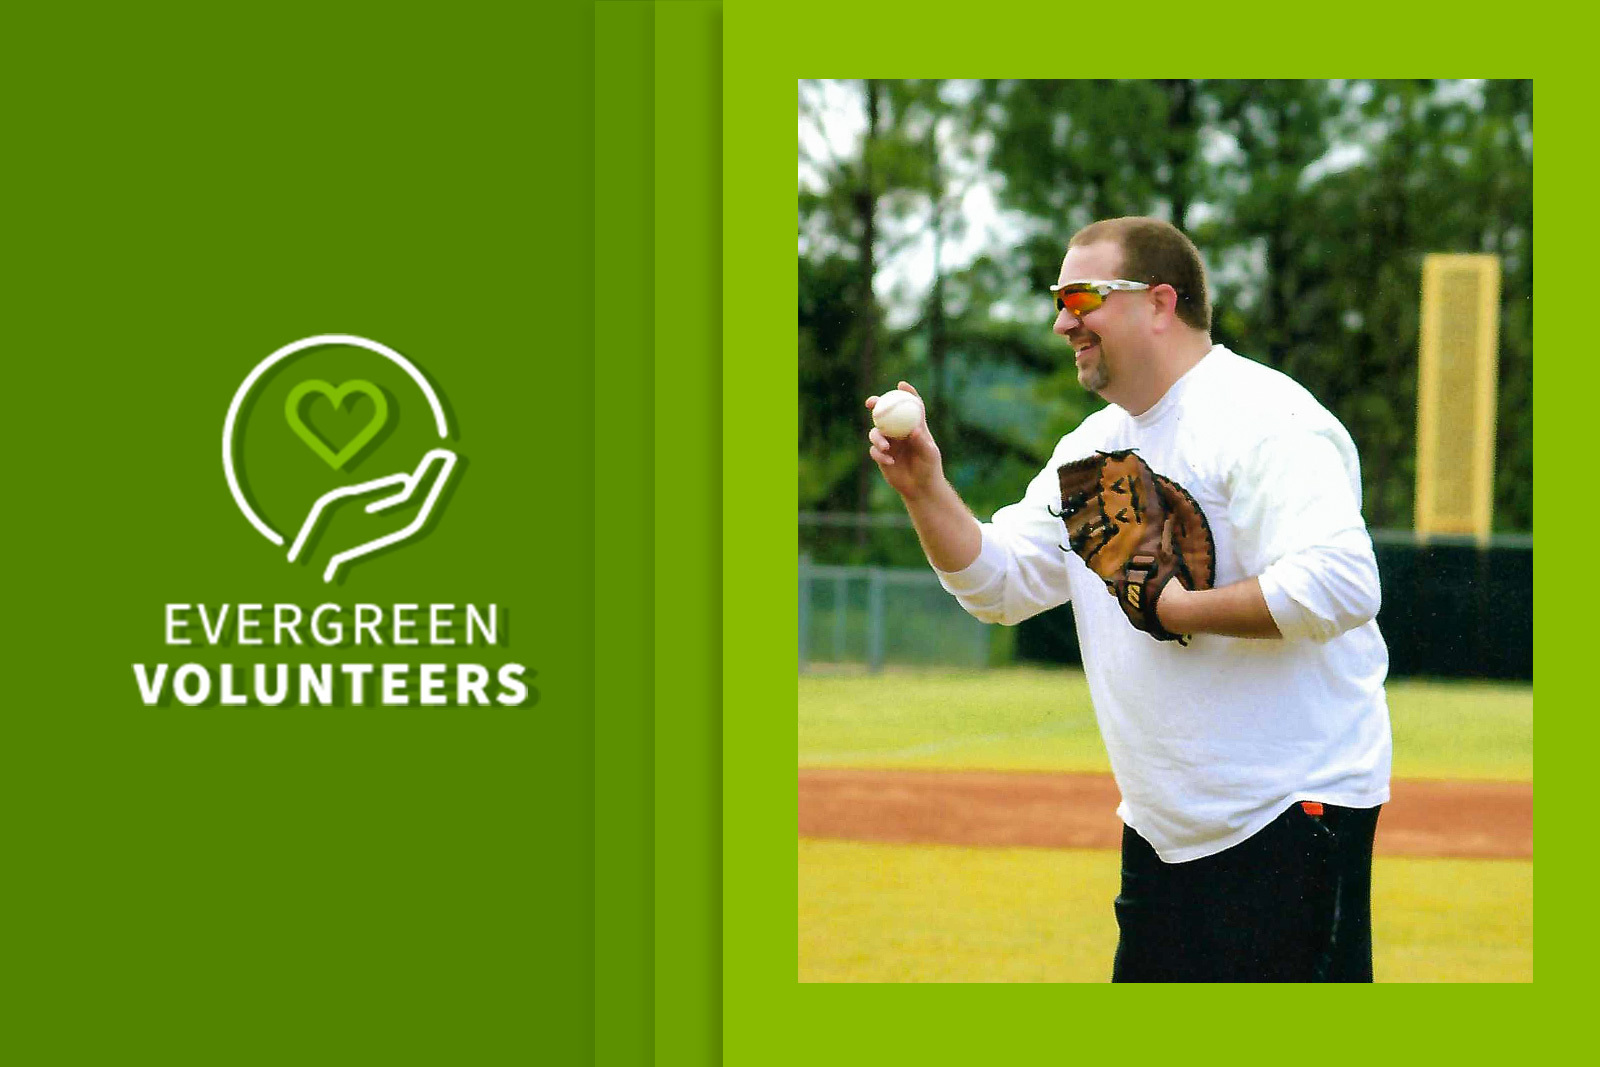 Photo of Jacob Couch and the Evergreen Volunteers logo